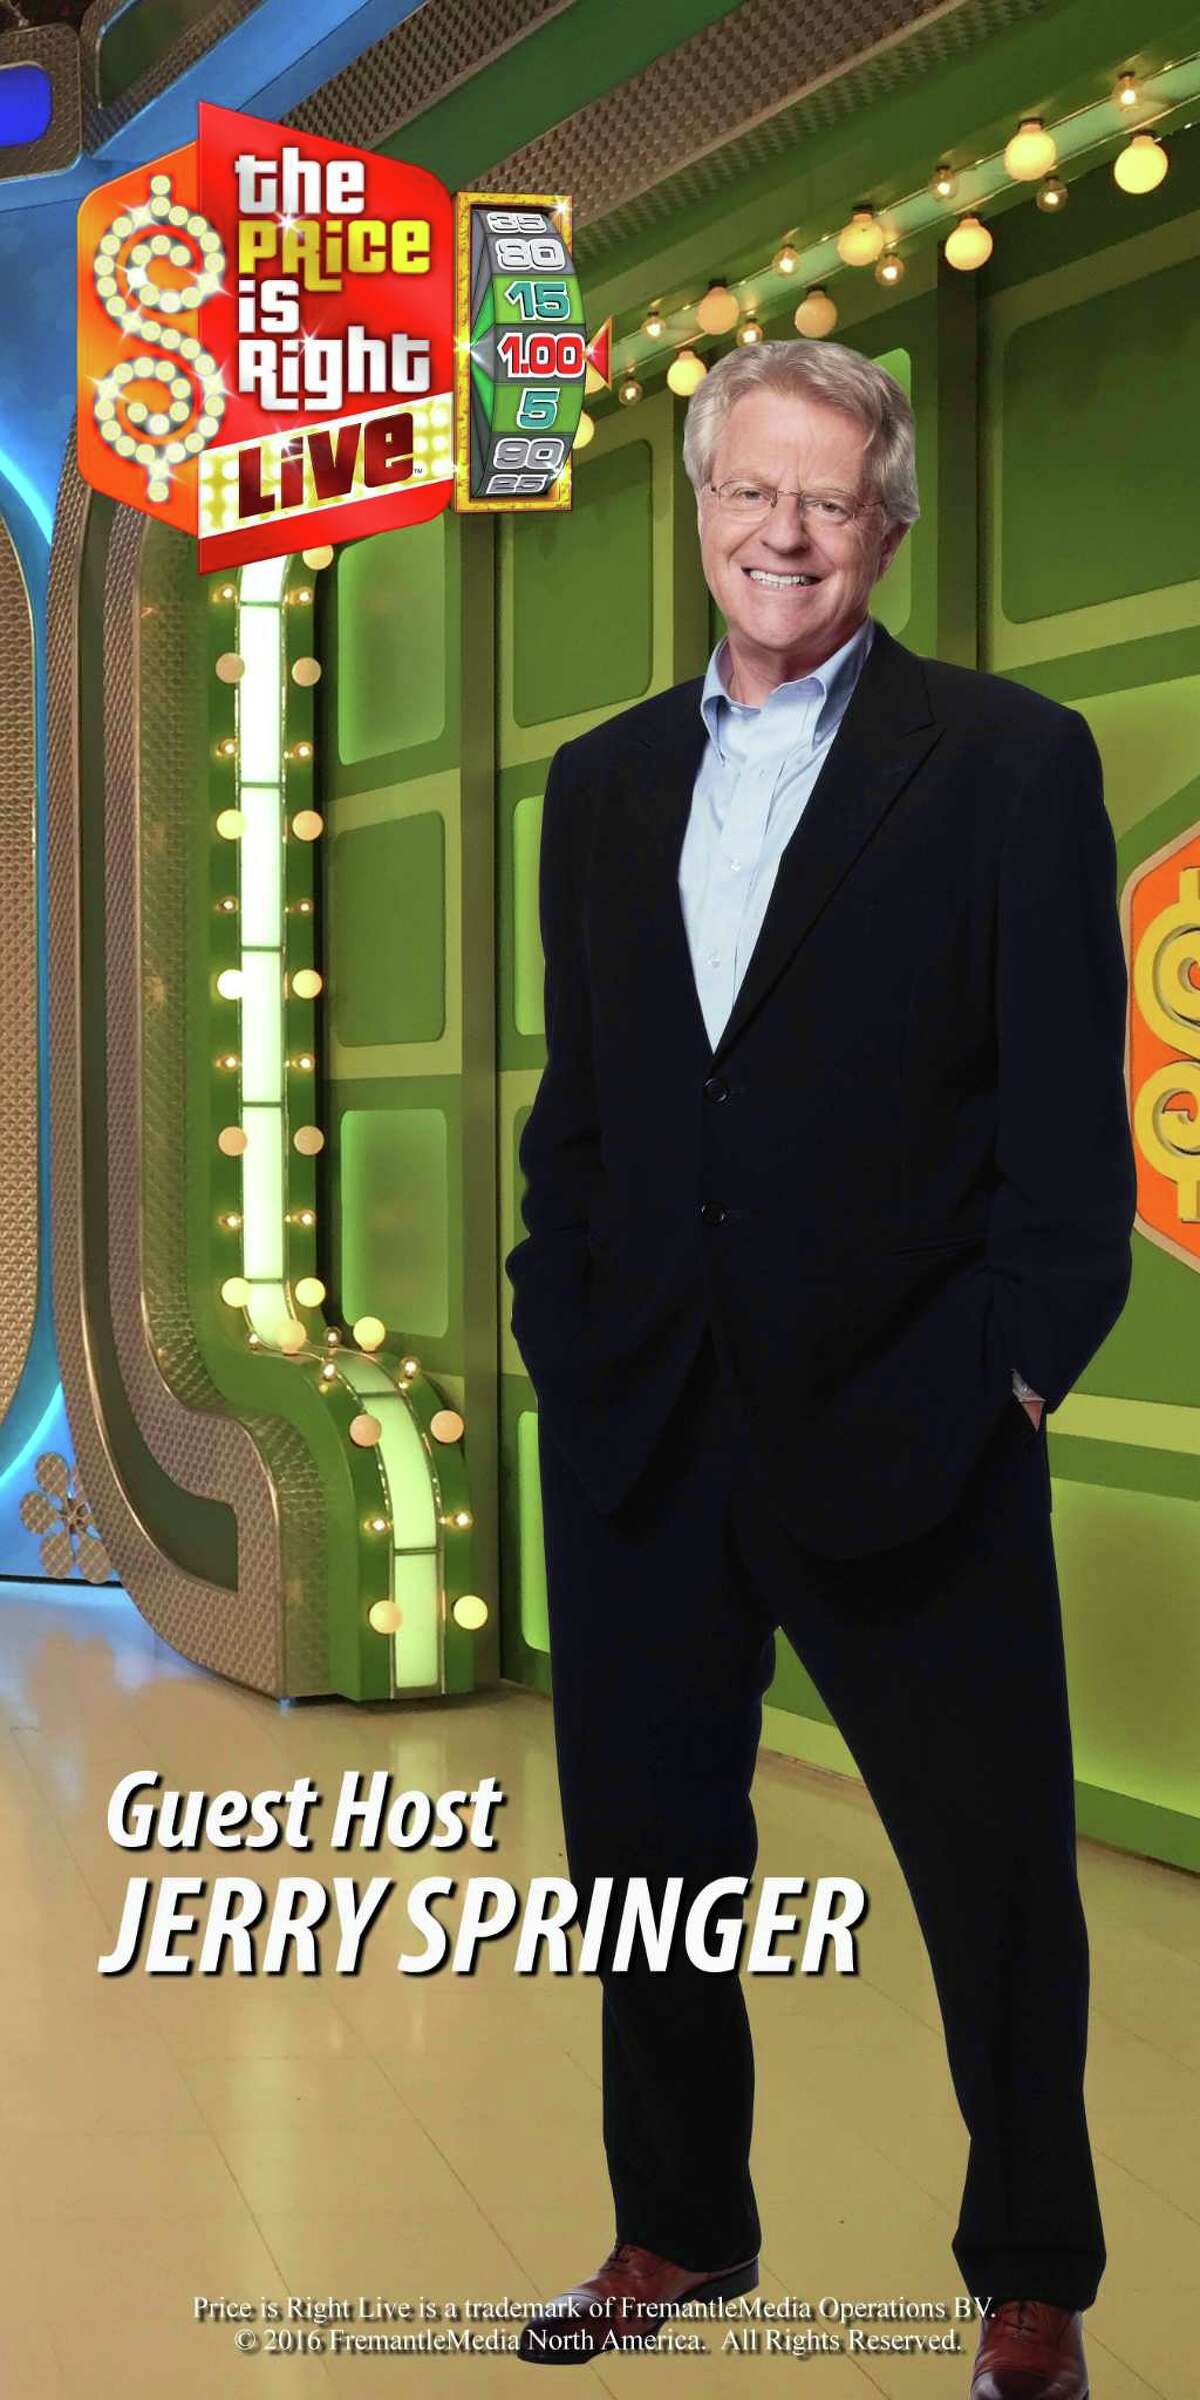 Come on down to "The Price is Right" at Foxwoods on Friday, Saturday, and Sunday. Did we mention Jerry Springer is hosting? Find out more. 